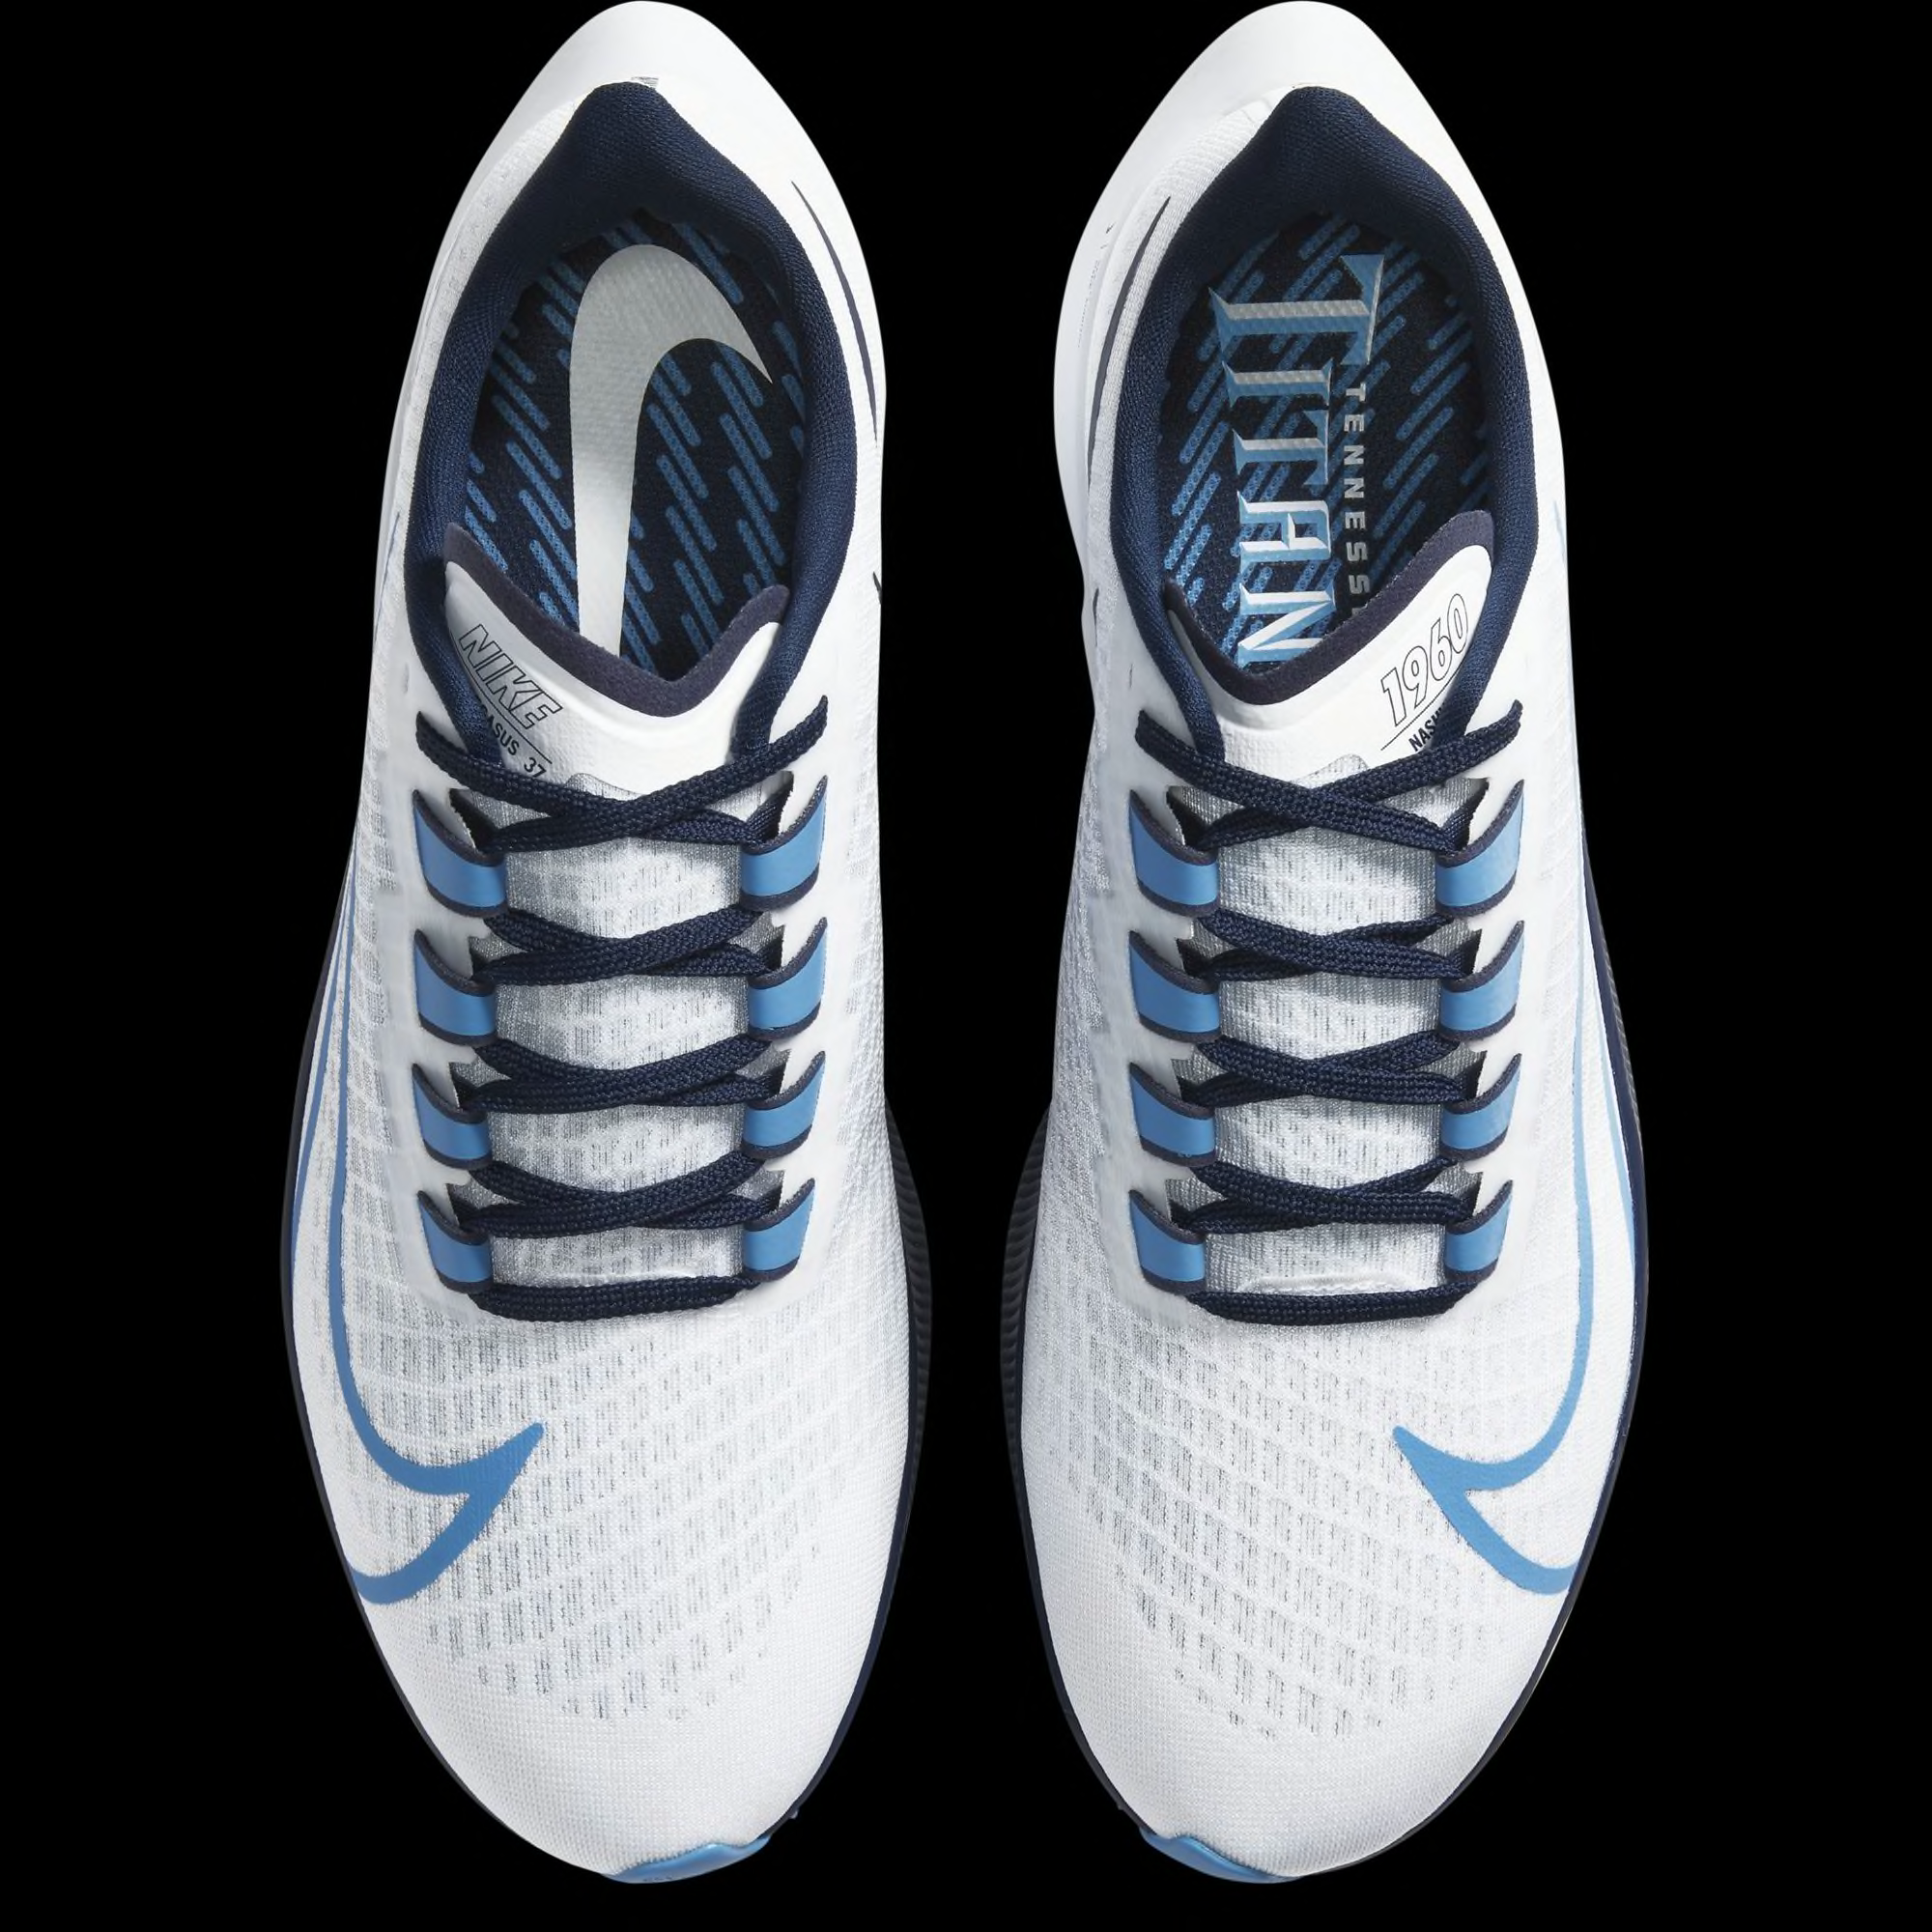 Tennessee Titans Nikes are awesome shoes